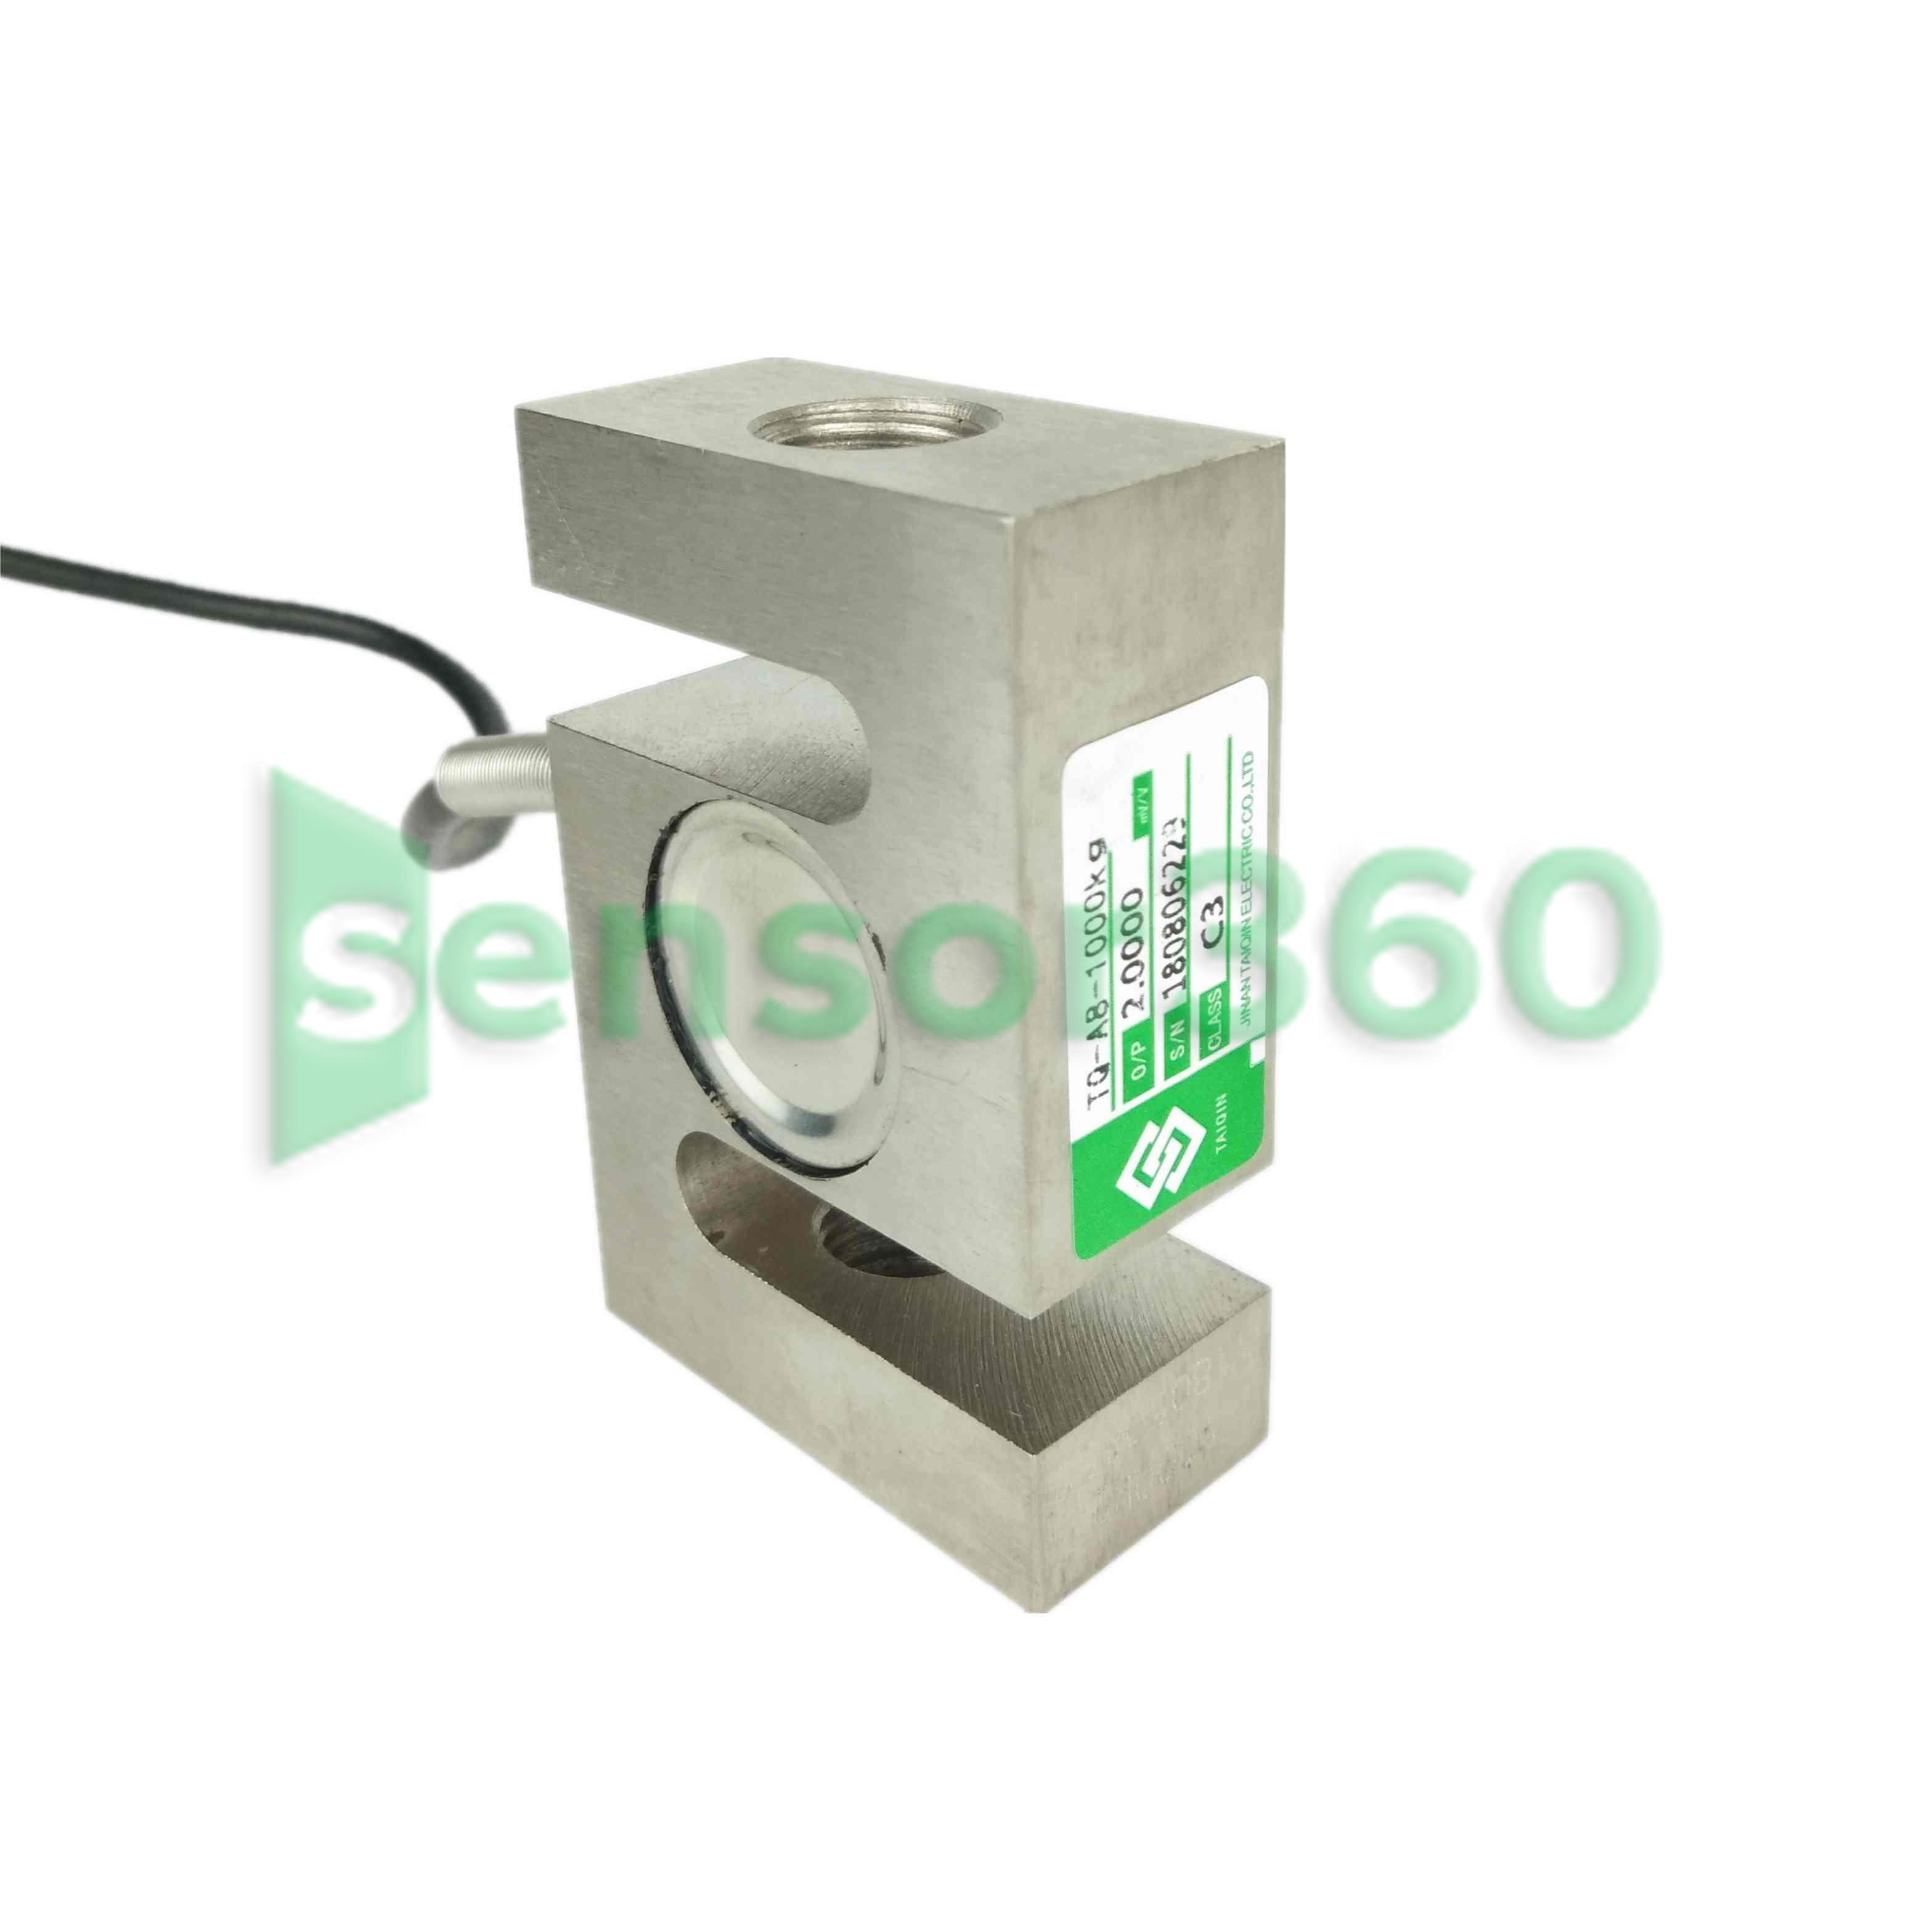 TQ-A8-500kg square S-type tension and compression weighing load cell